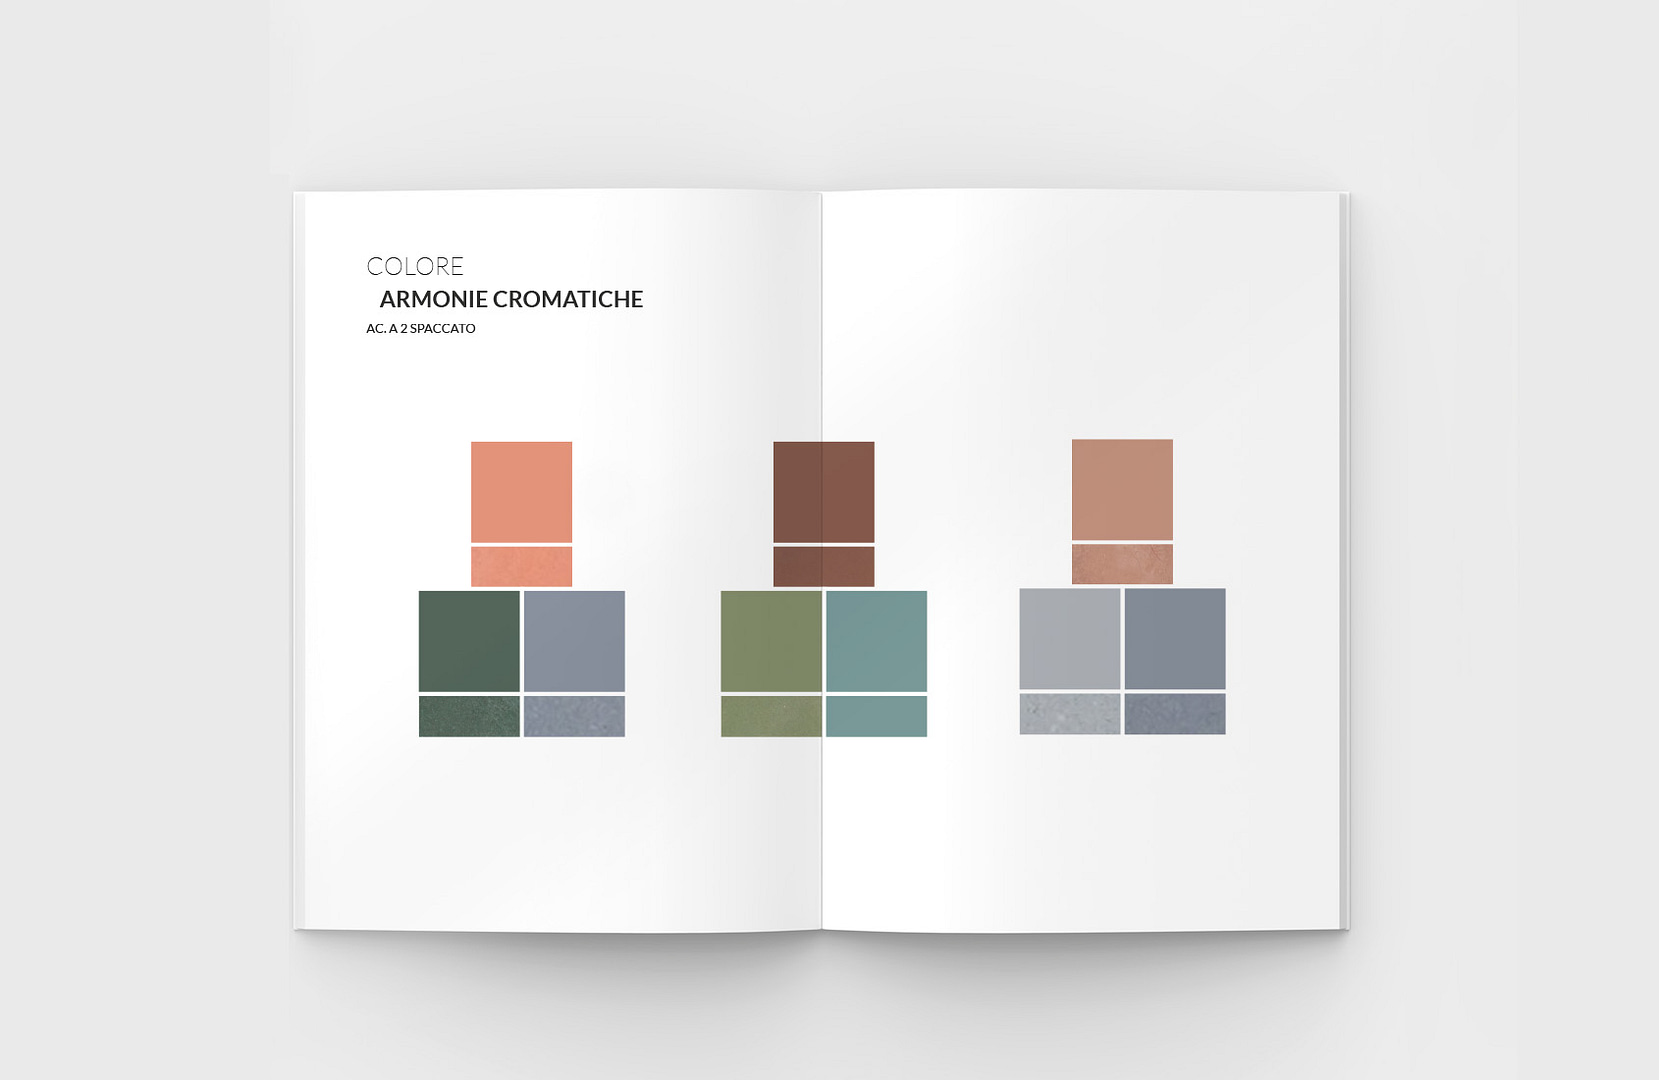 Color trends